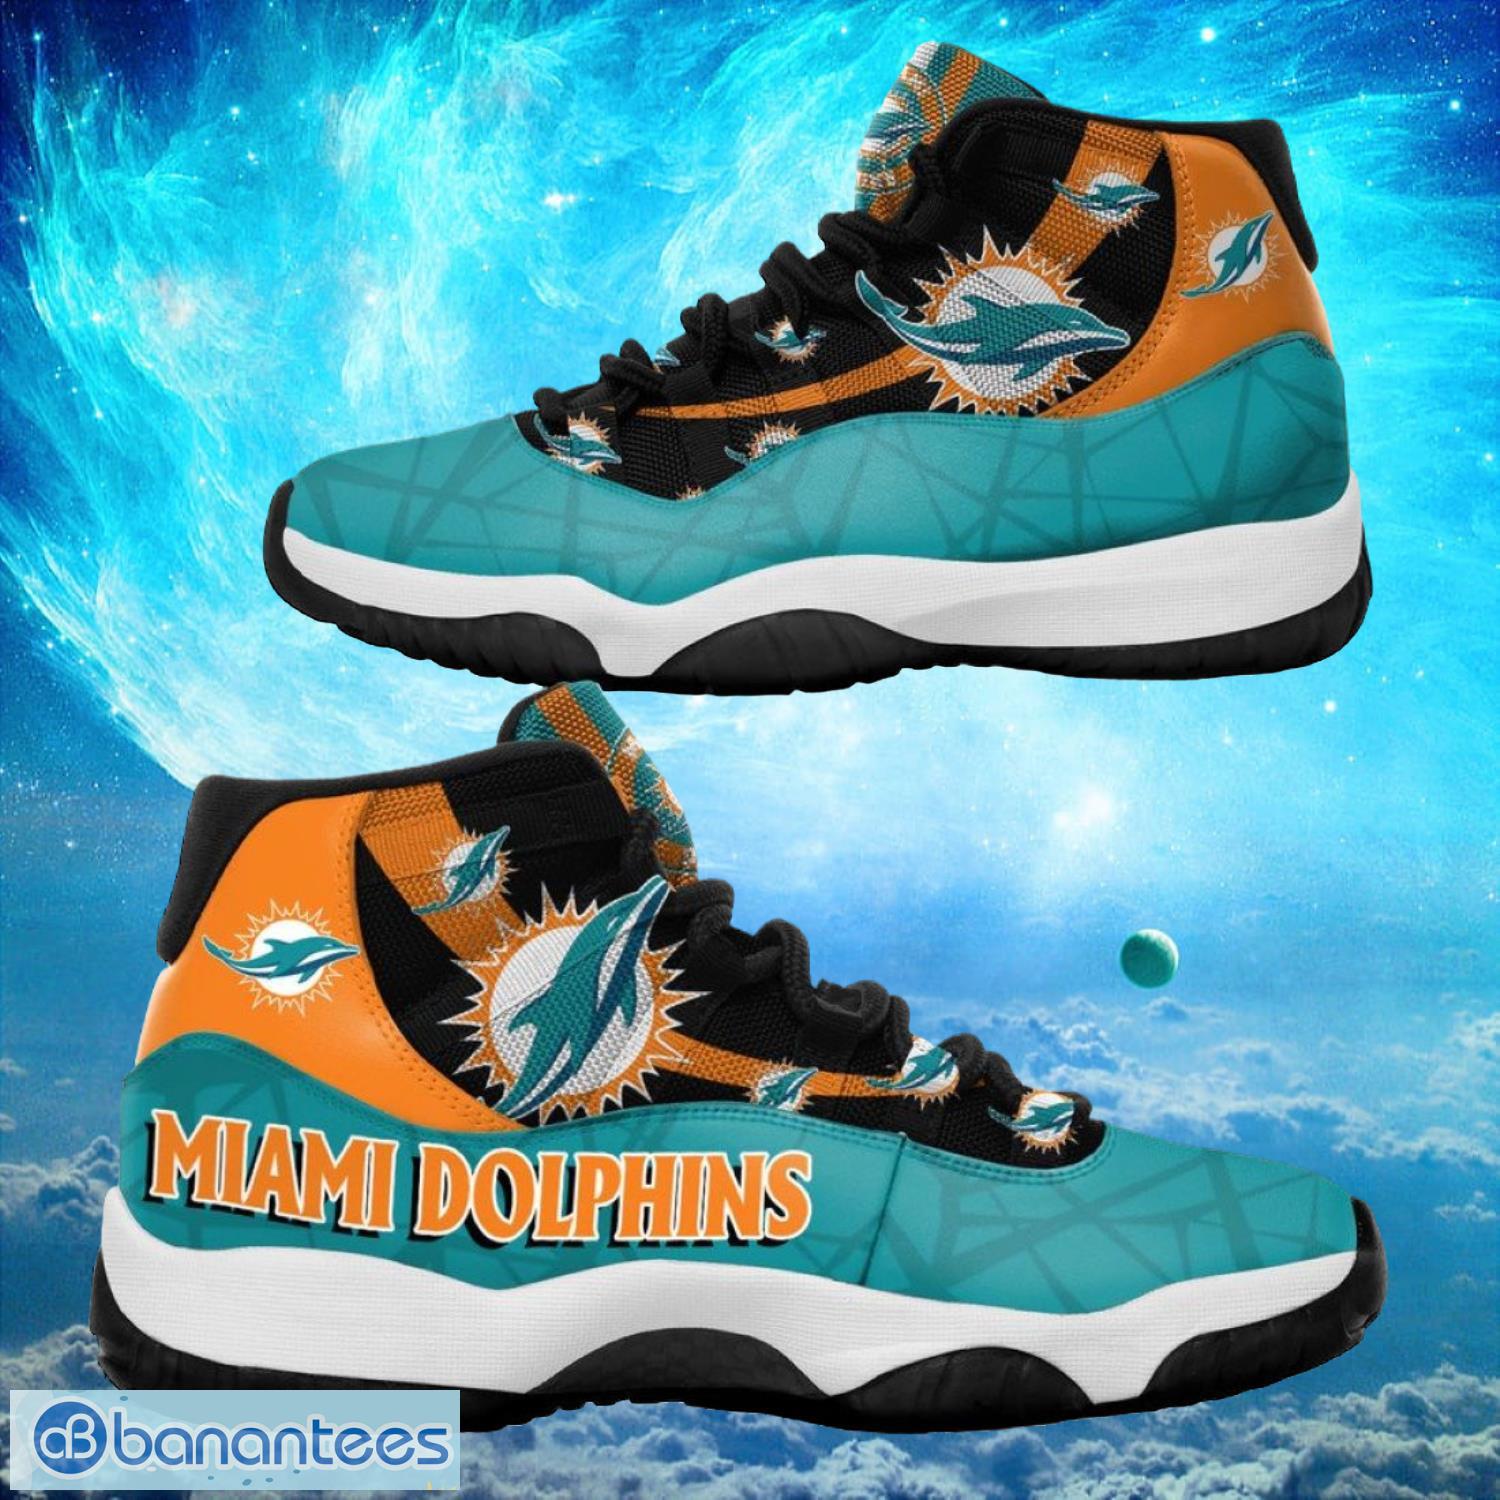 Miami Dolphins NFL Air Jordan 11 Sneakers Shoes Gift For Fans Product Photo 1